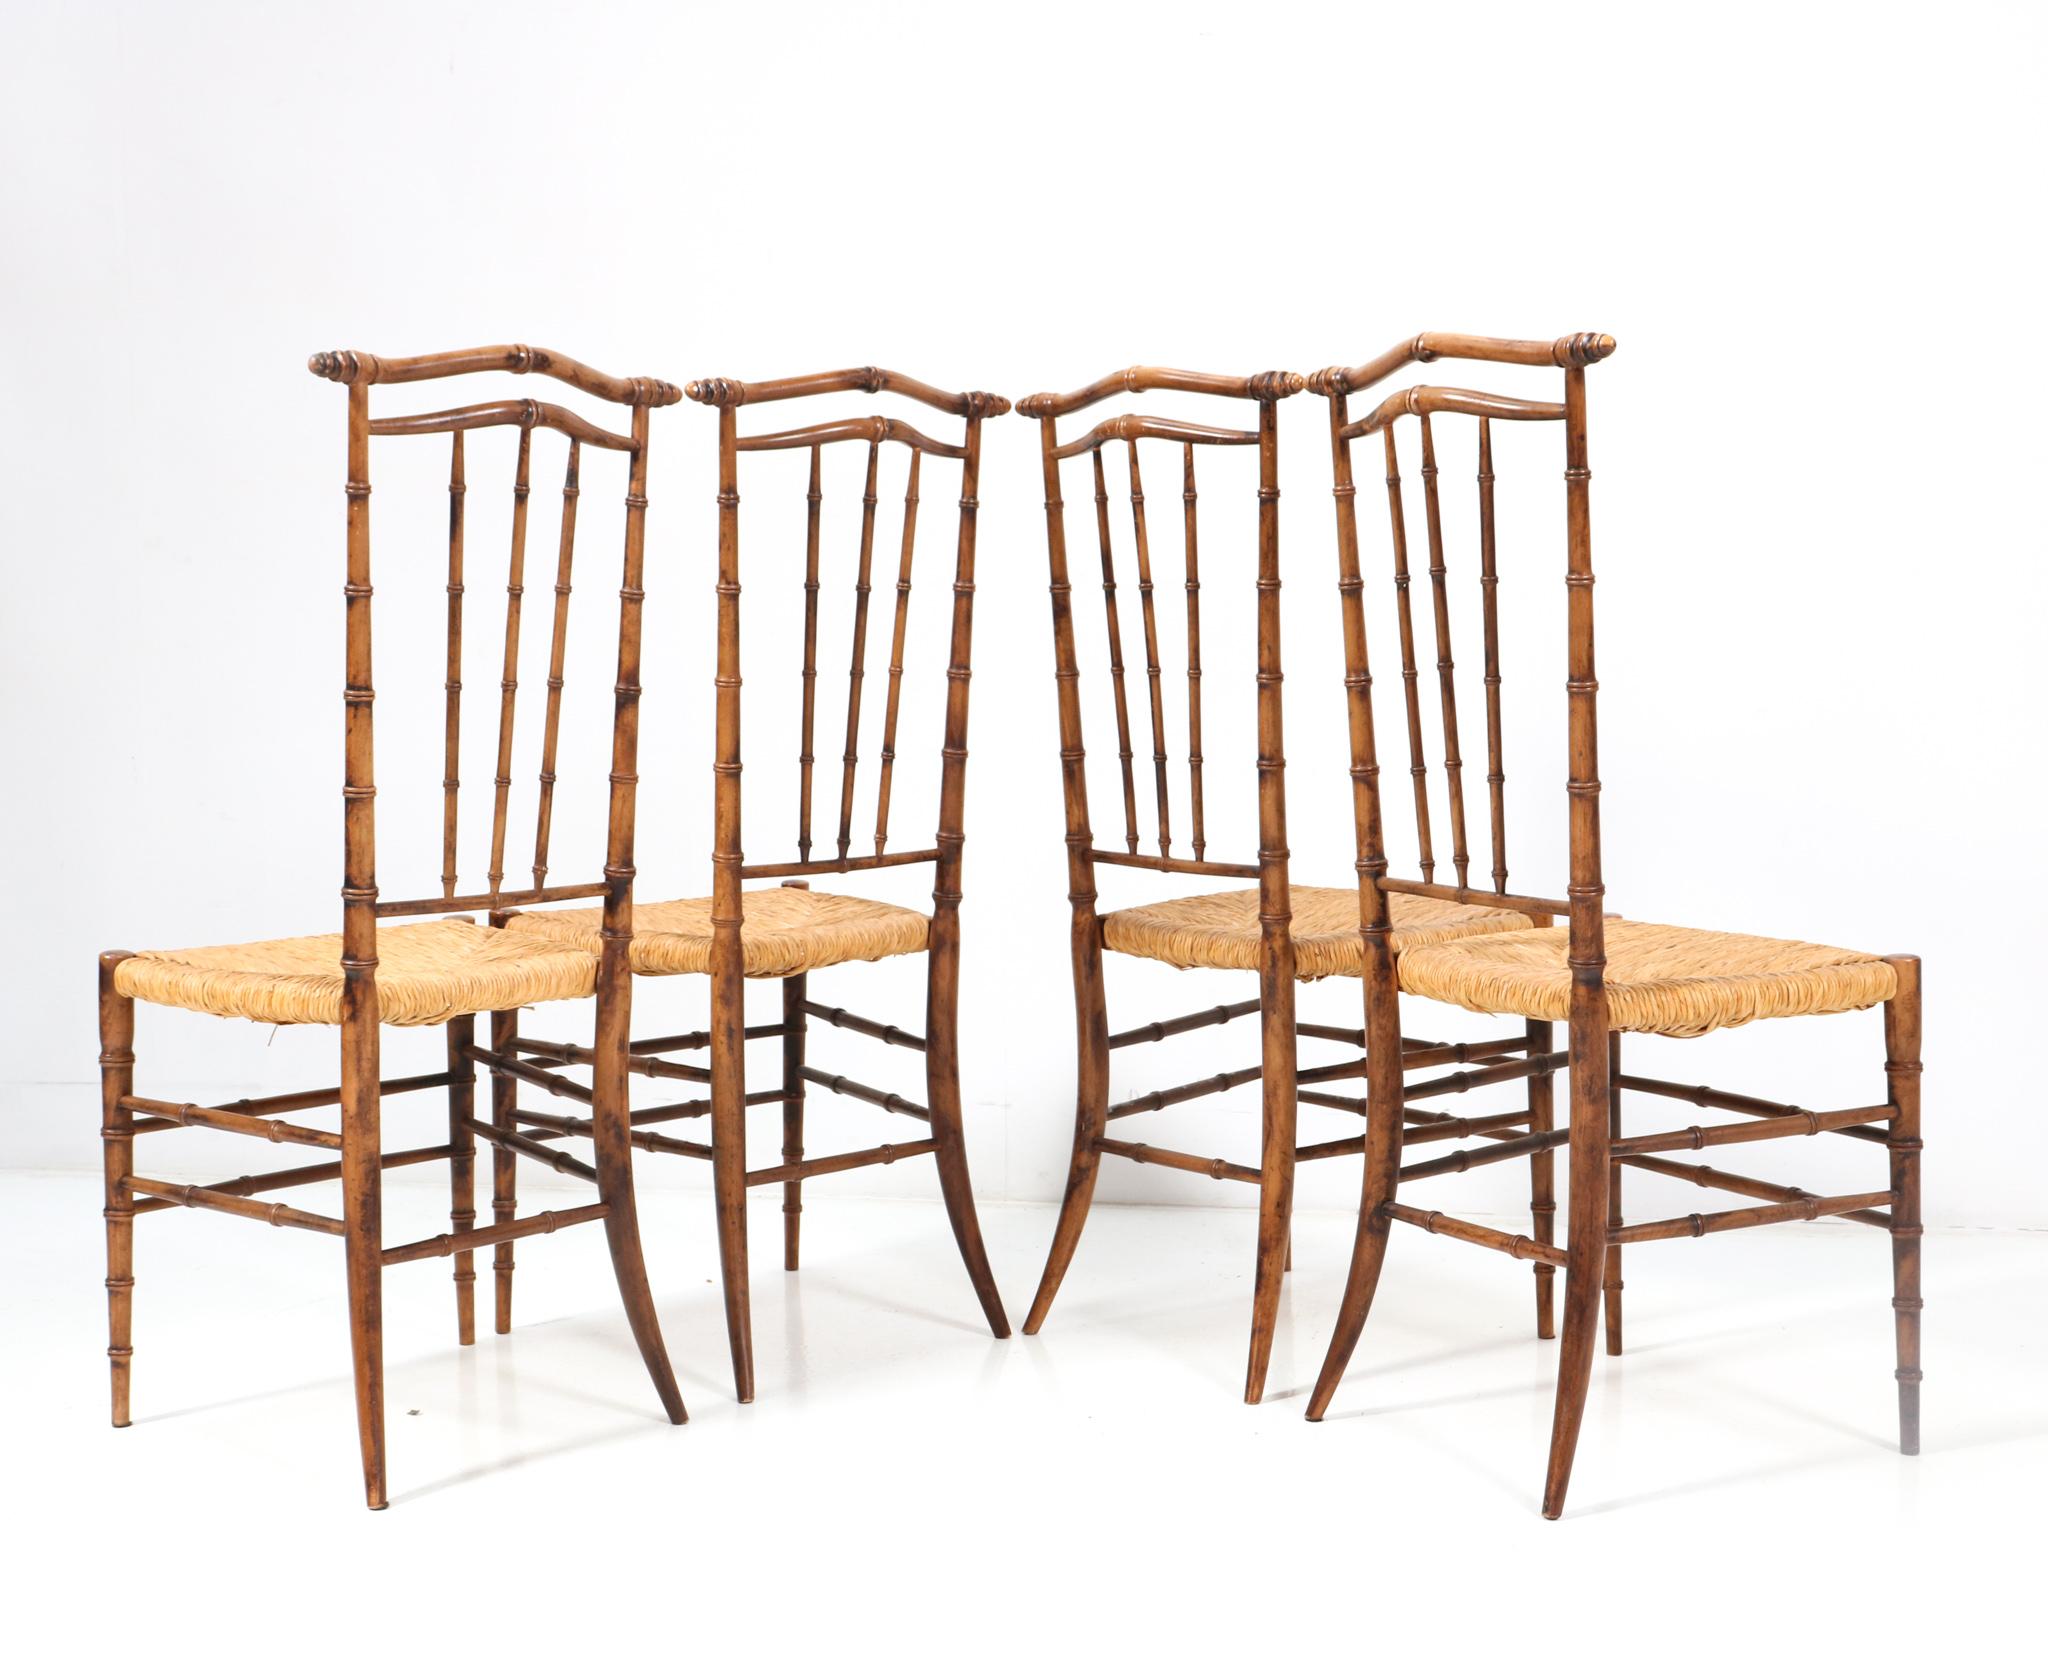 Four Beech Mid-Century Modern Faux Bamboo High Back Dining Room Chairs, 1970s In Good Condition For Sale In Amsterdam, NL